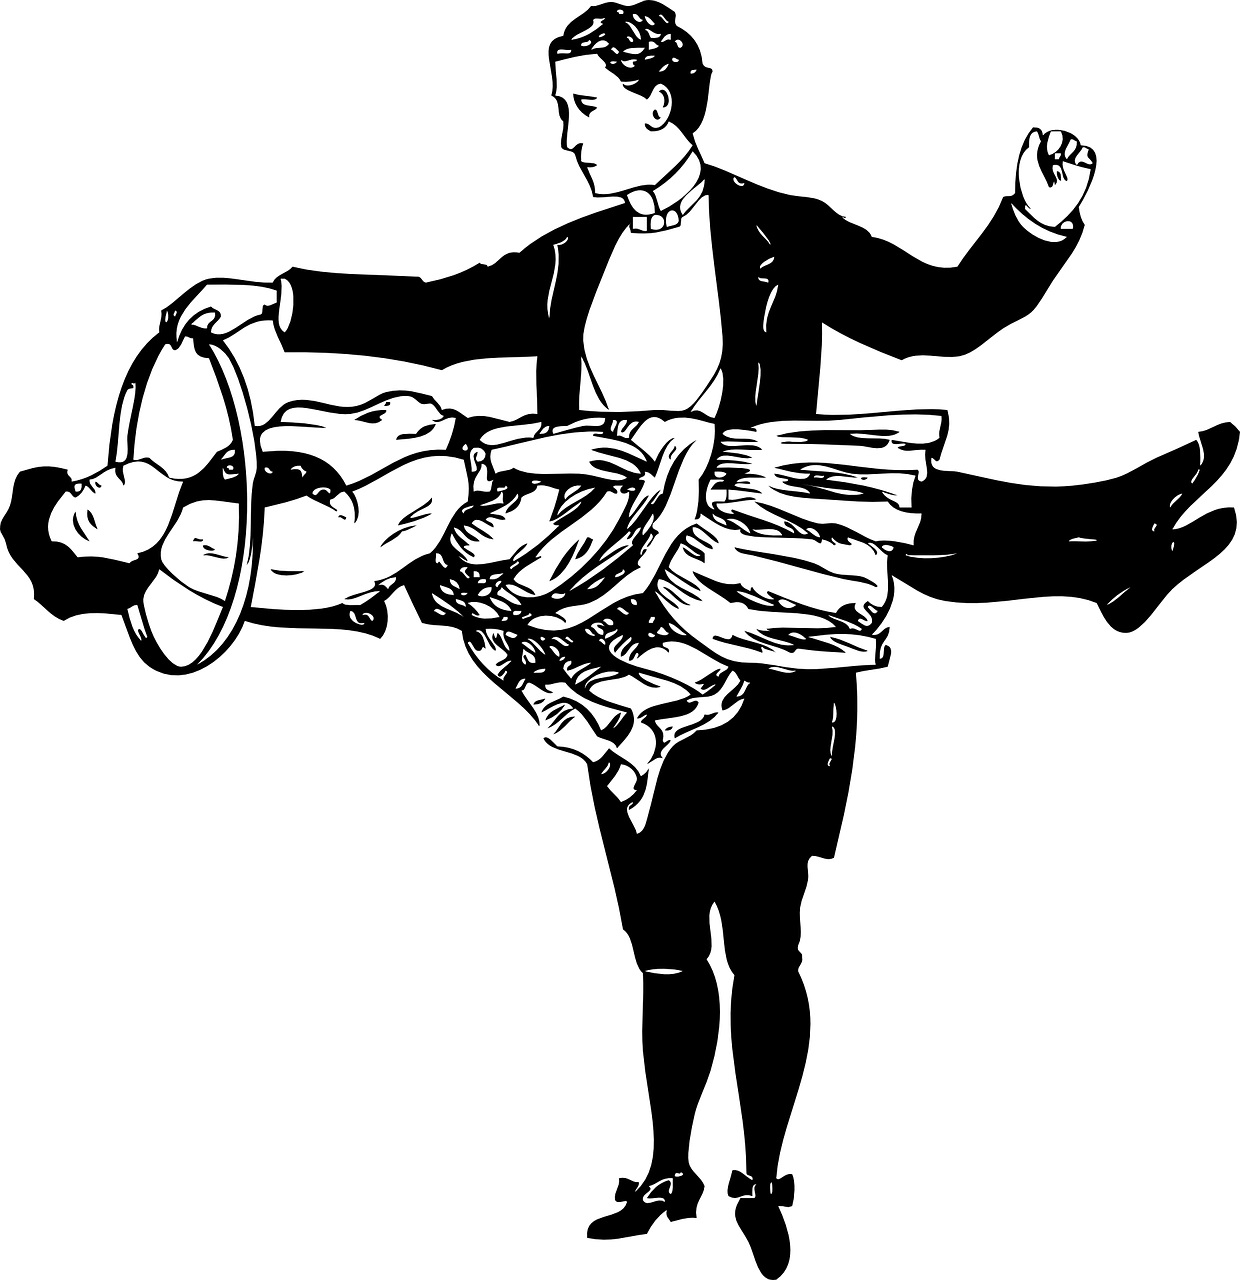 Magician with assistant floating